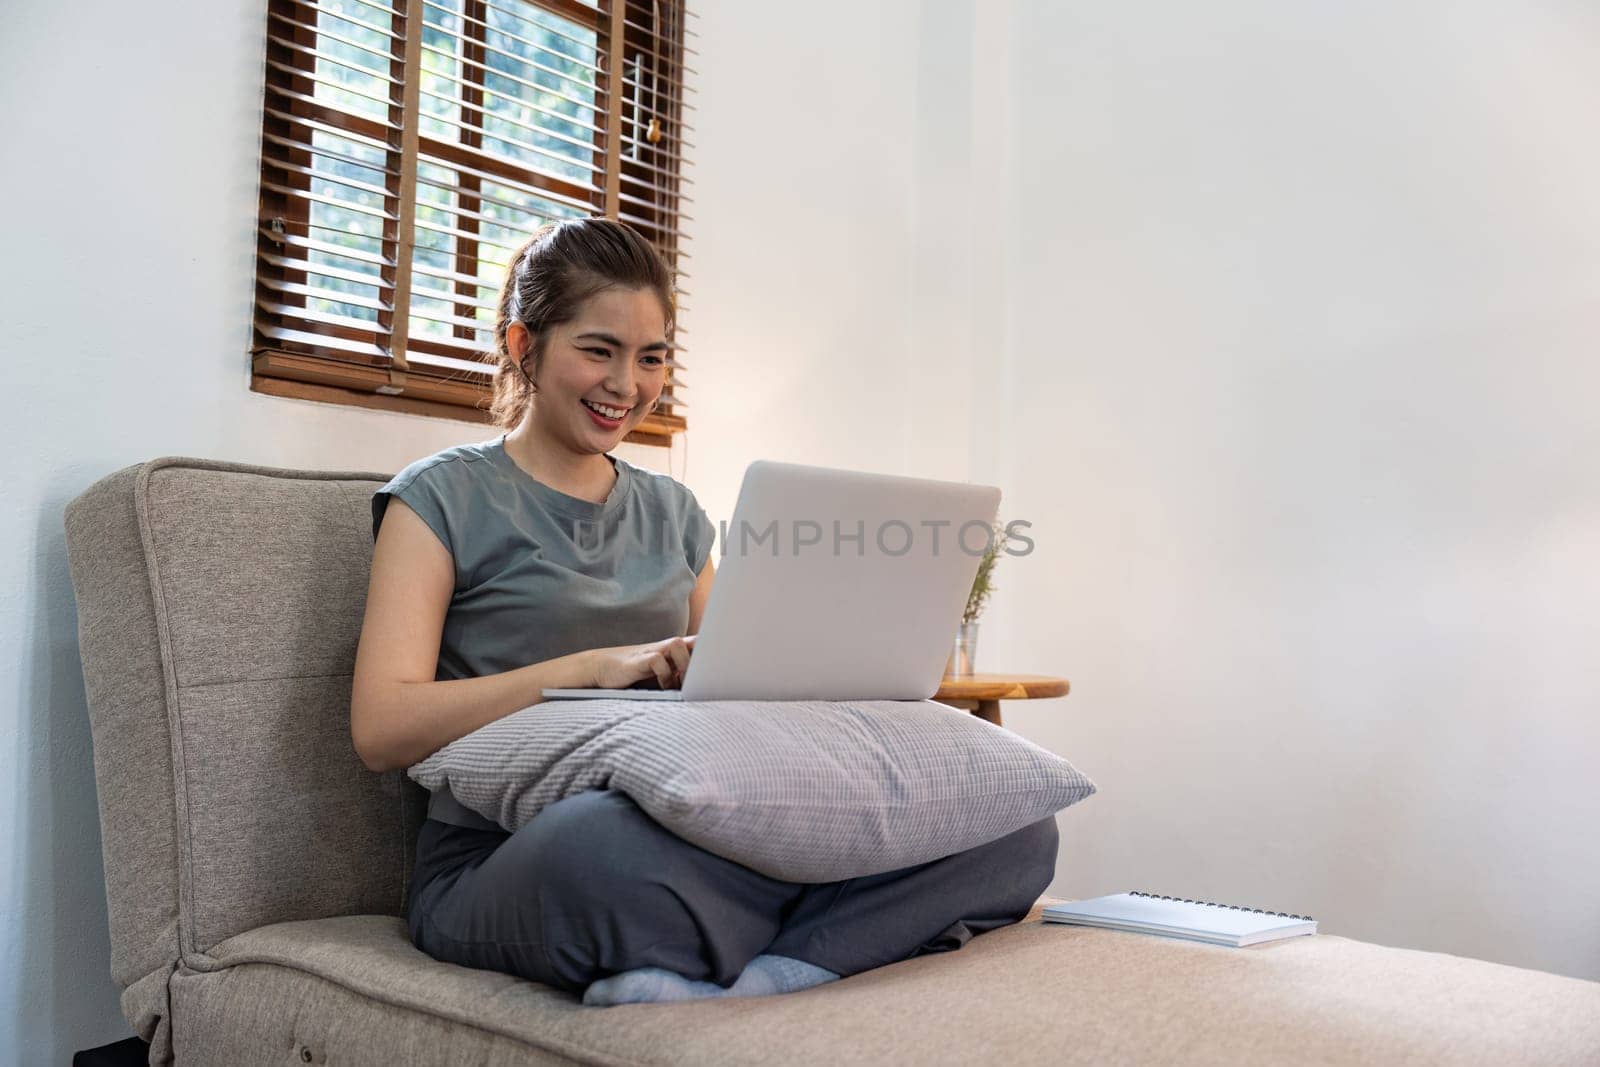 Young woman asian using laptop pc computer on couch relax surfing the net at home by nateemee